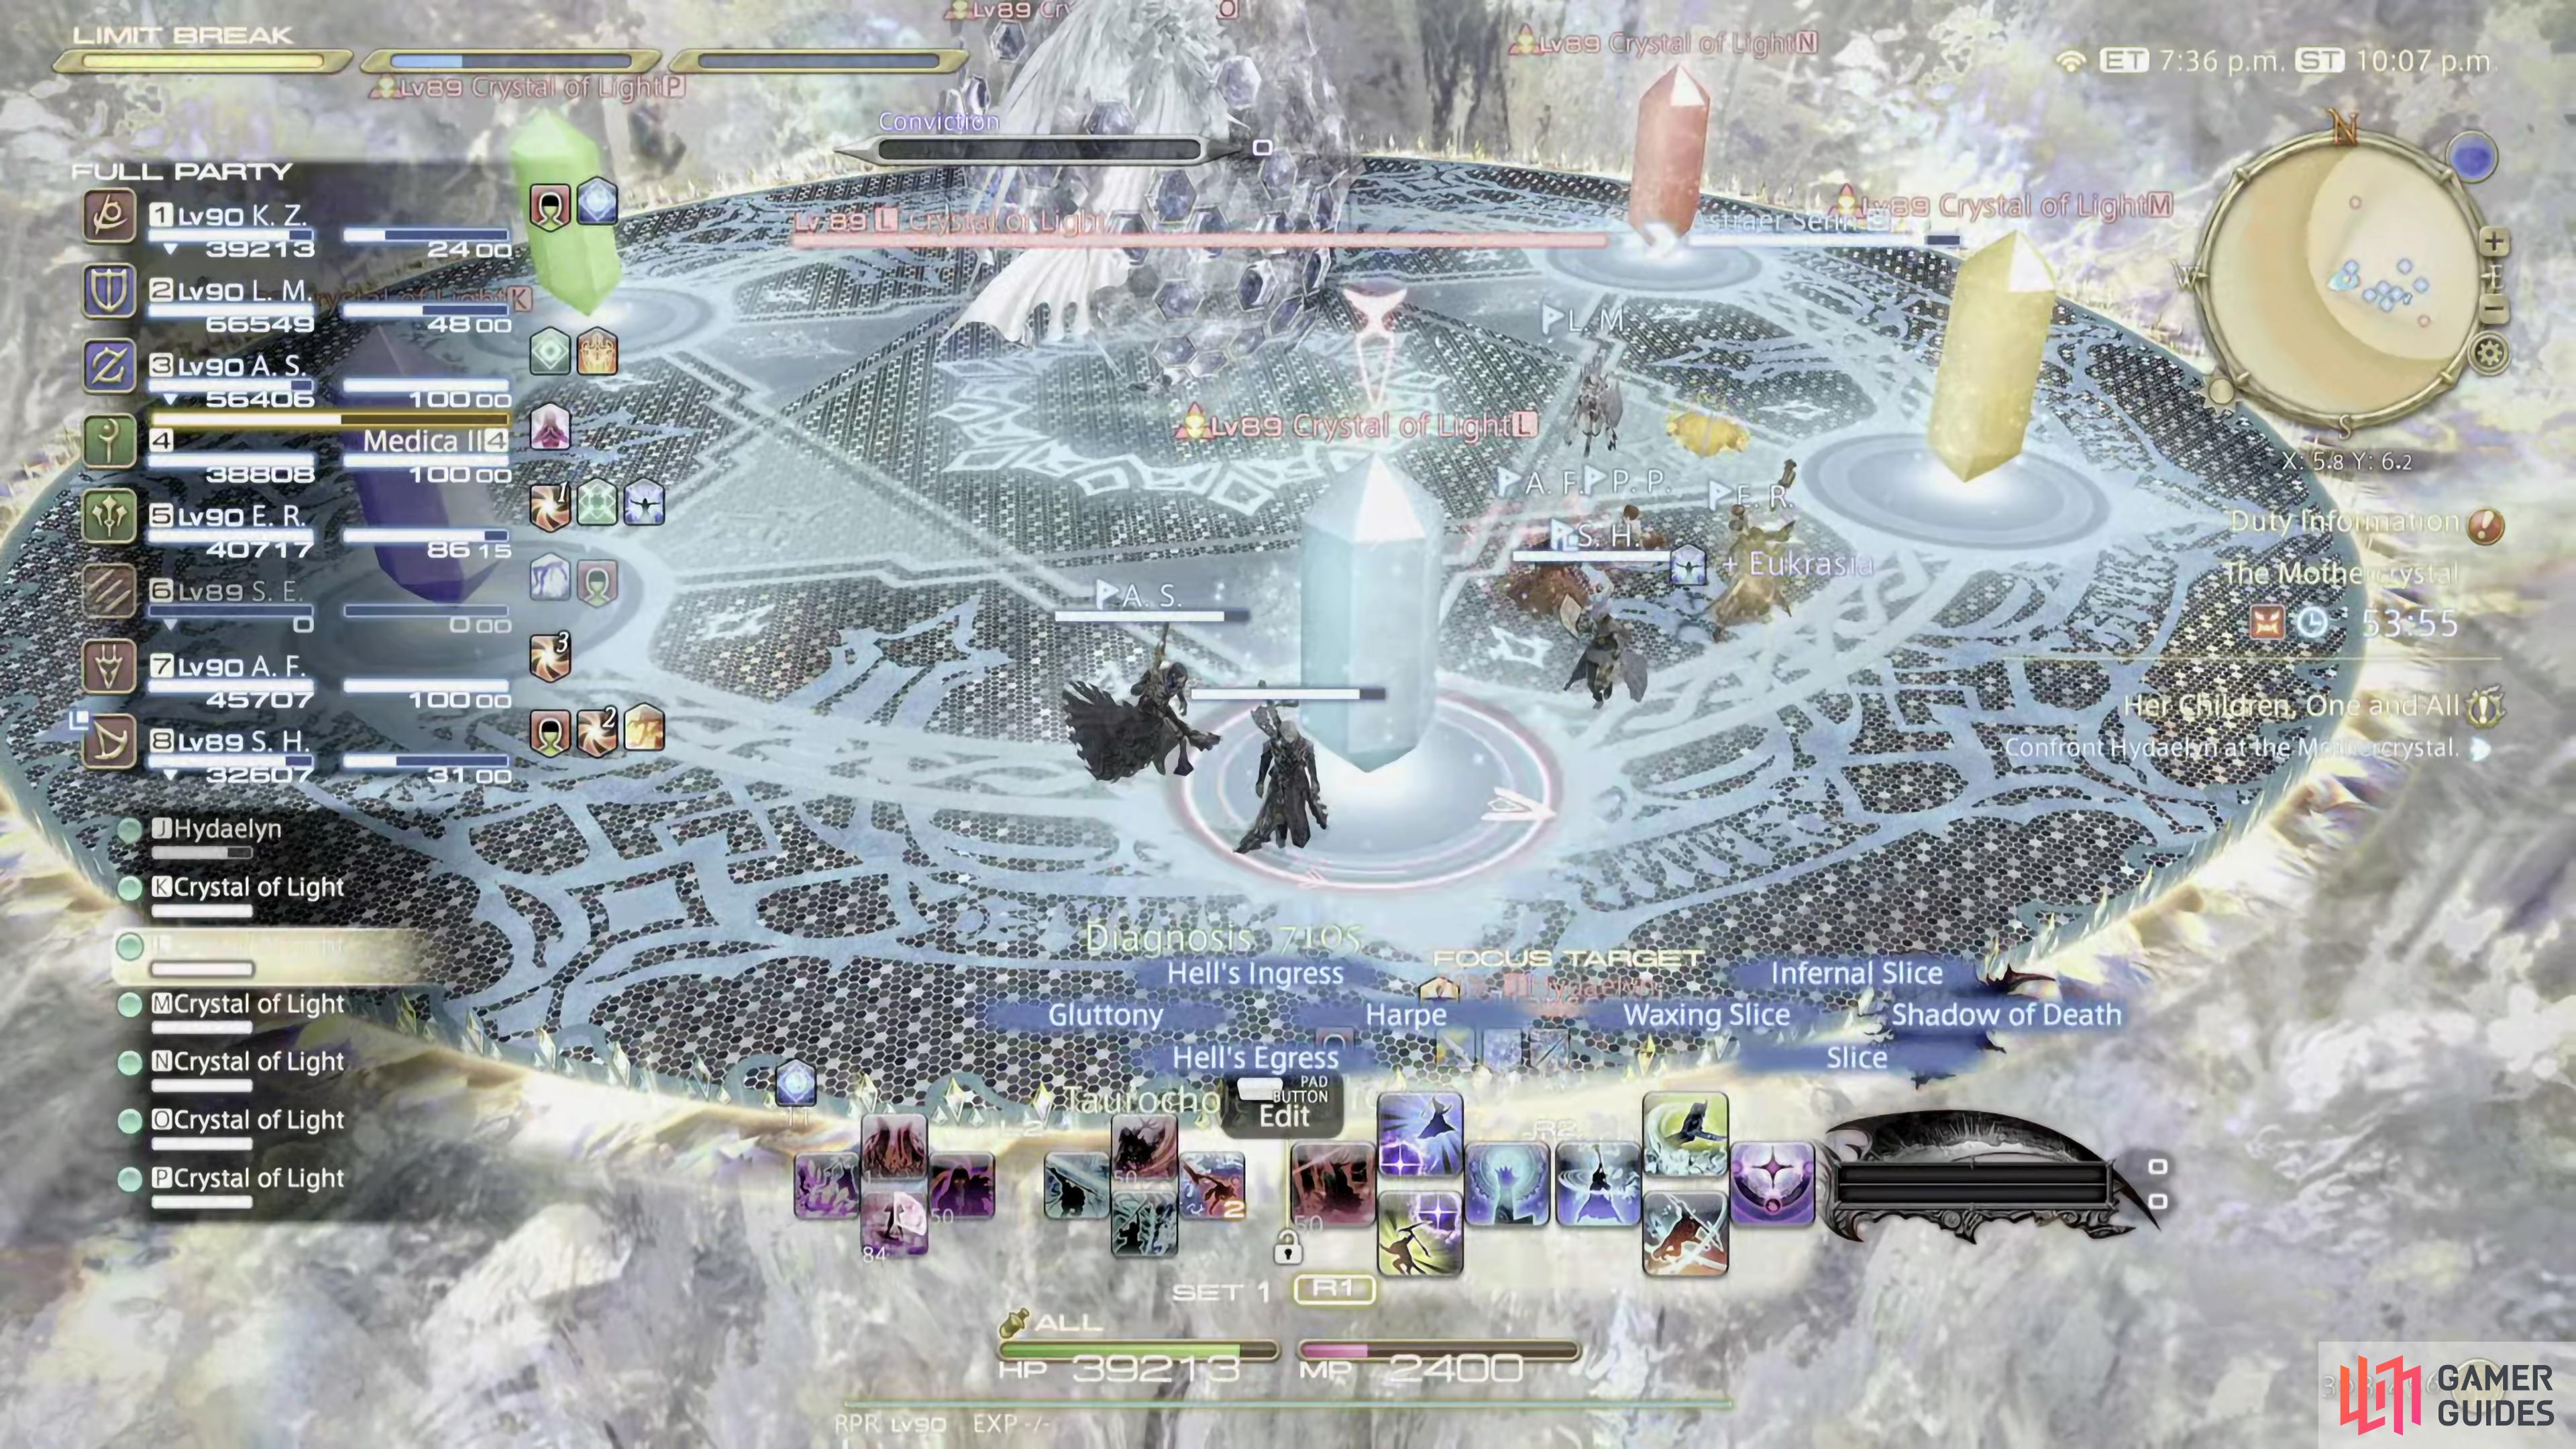 Phase 2 begins when Hydaelyn summons six crystals in the arena. All of the crystals need to be destroyed before her Conviction gauge reaches 100.